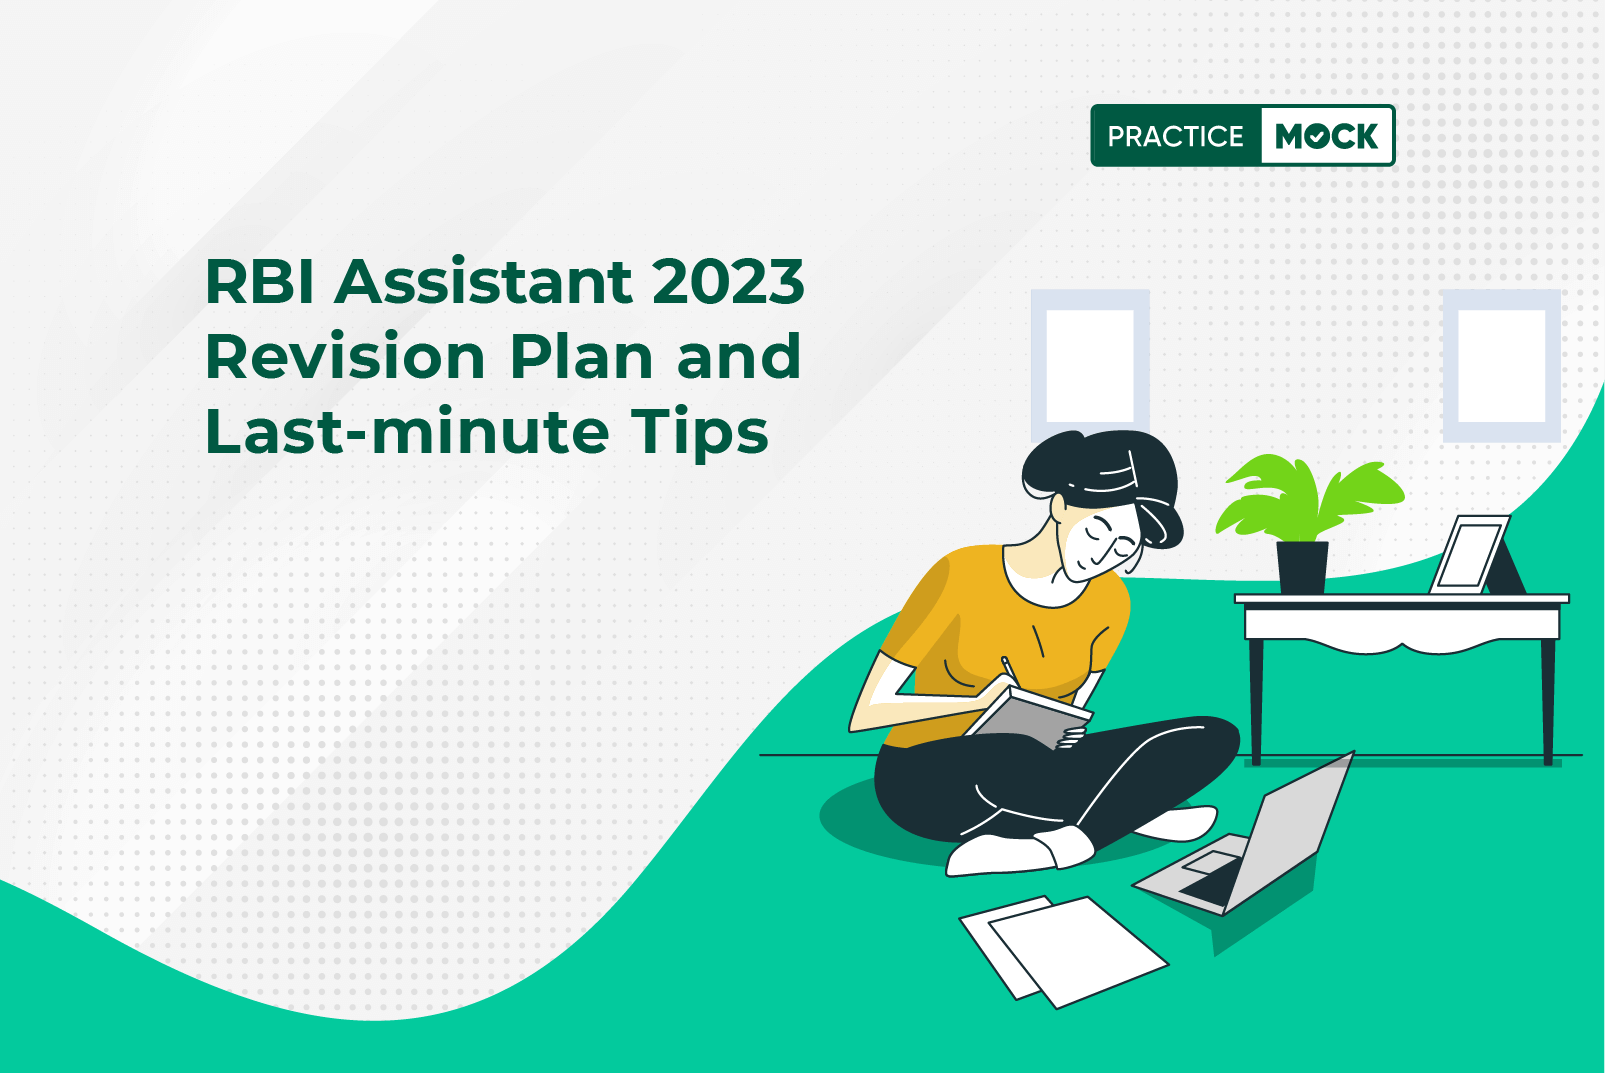 RBI Assistant 2023 Revision Plan